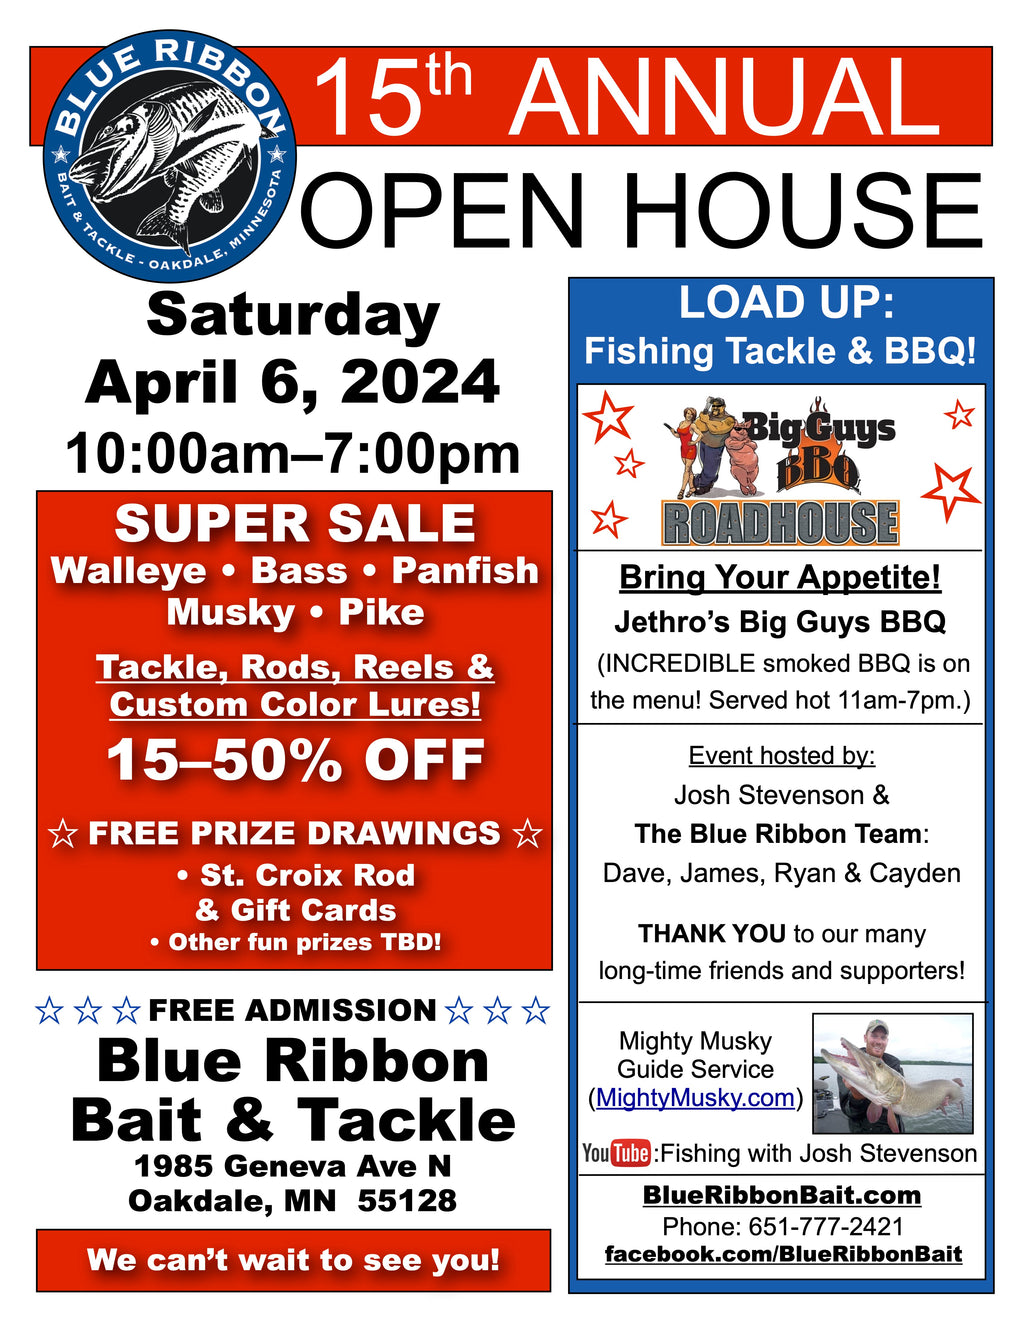 Save the date! Saturday, APRIL 6, 2024 – Blue Ribbon Bait & Tackle